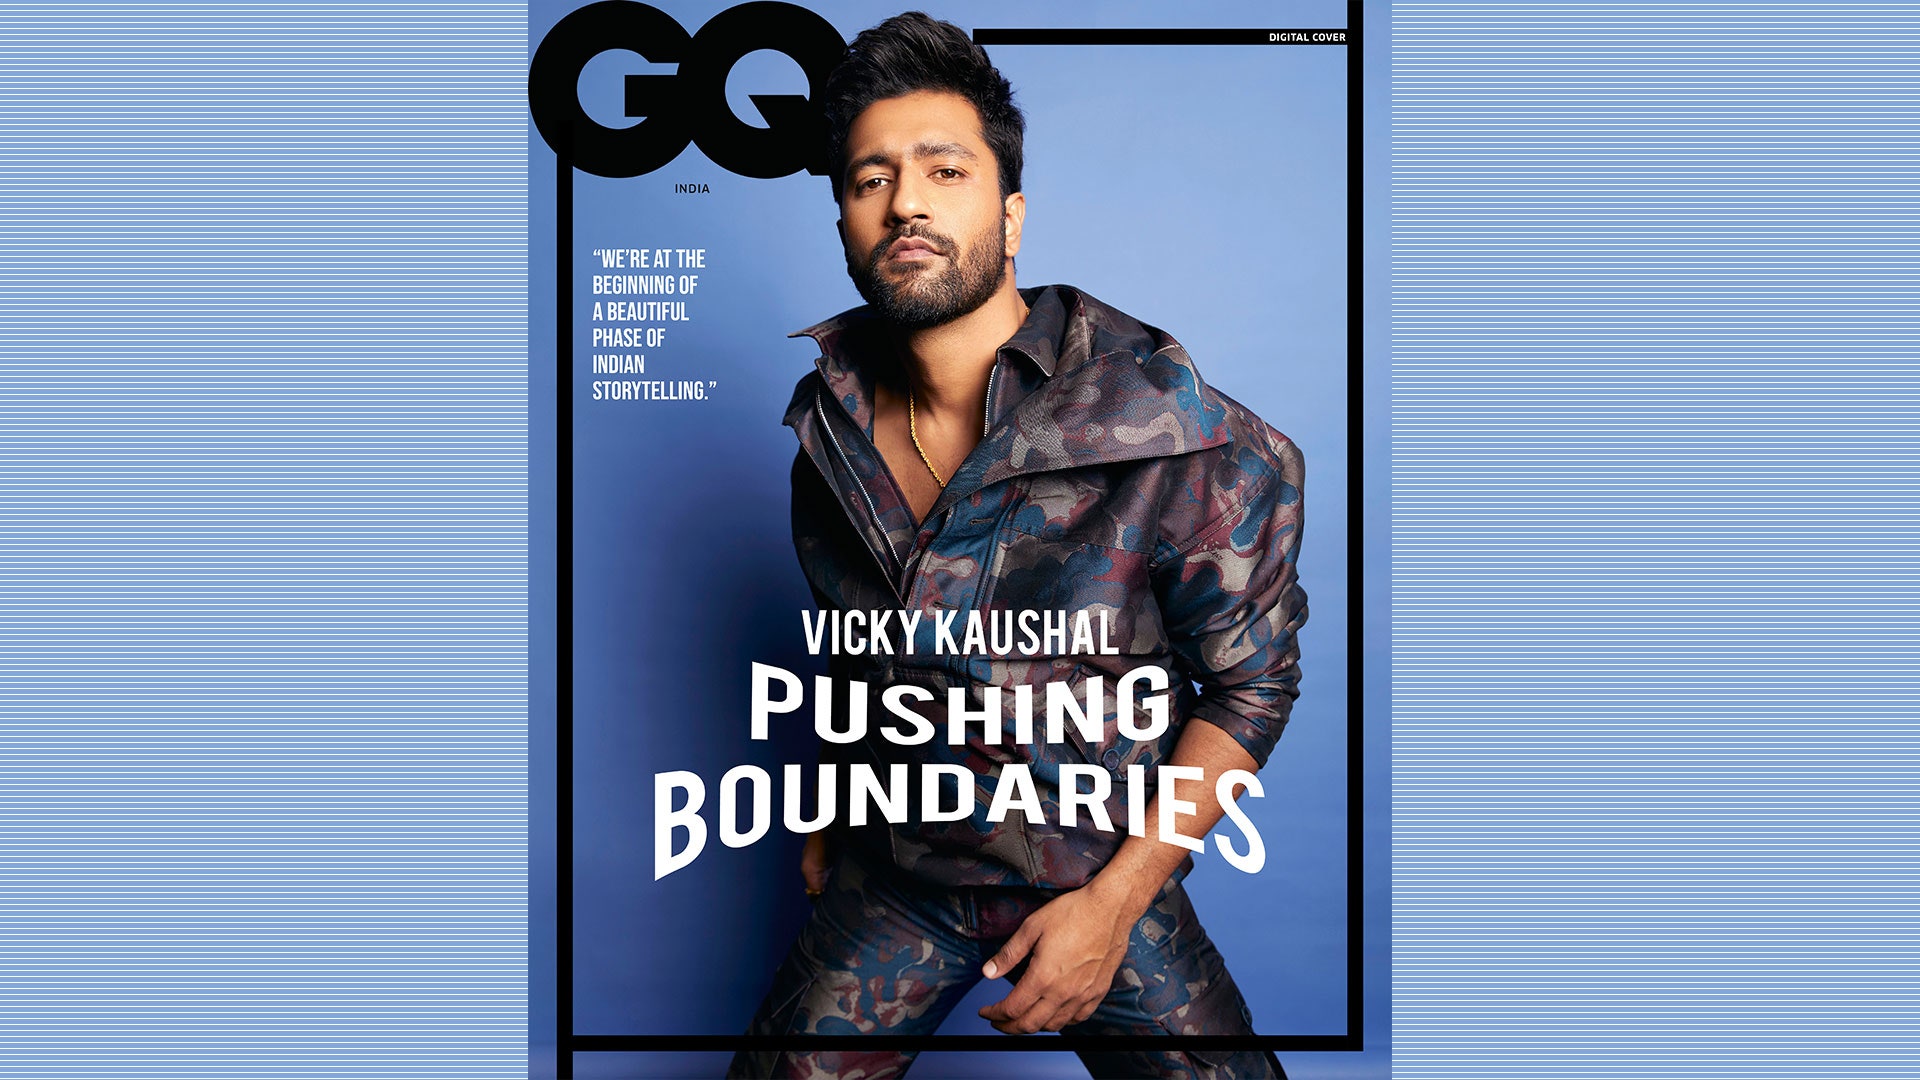 Vicky Kaushal on the emotional and physical challenges in playing 1920x1080